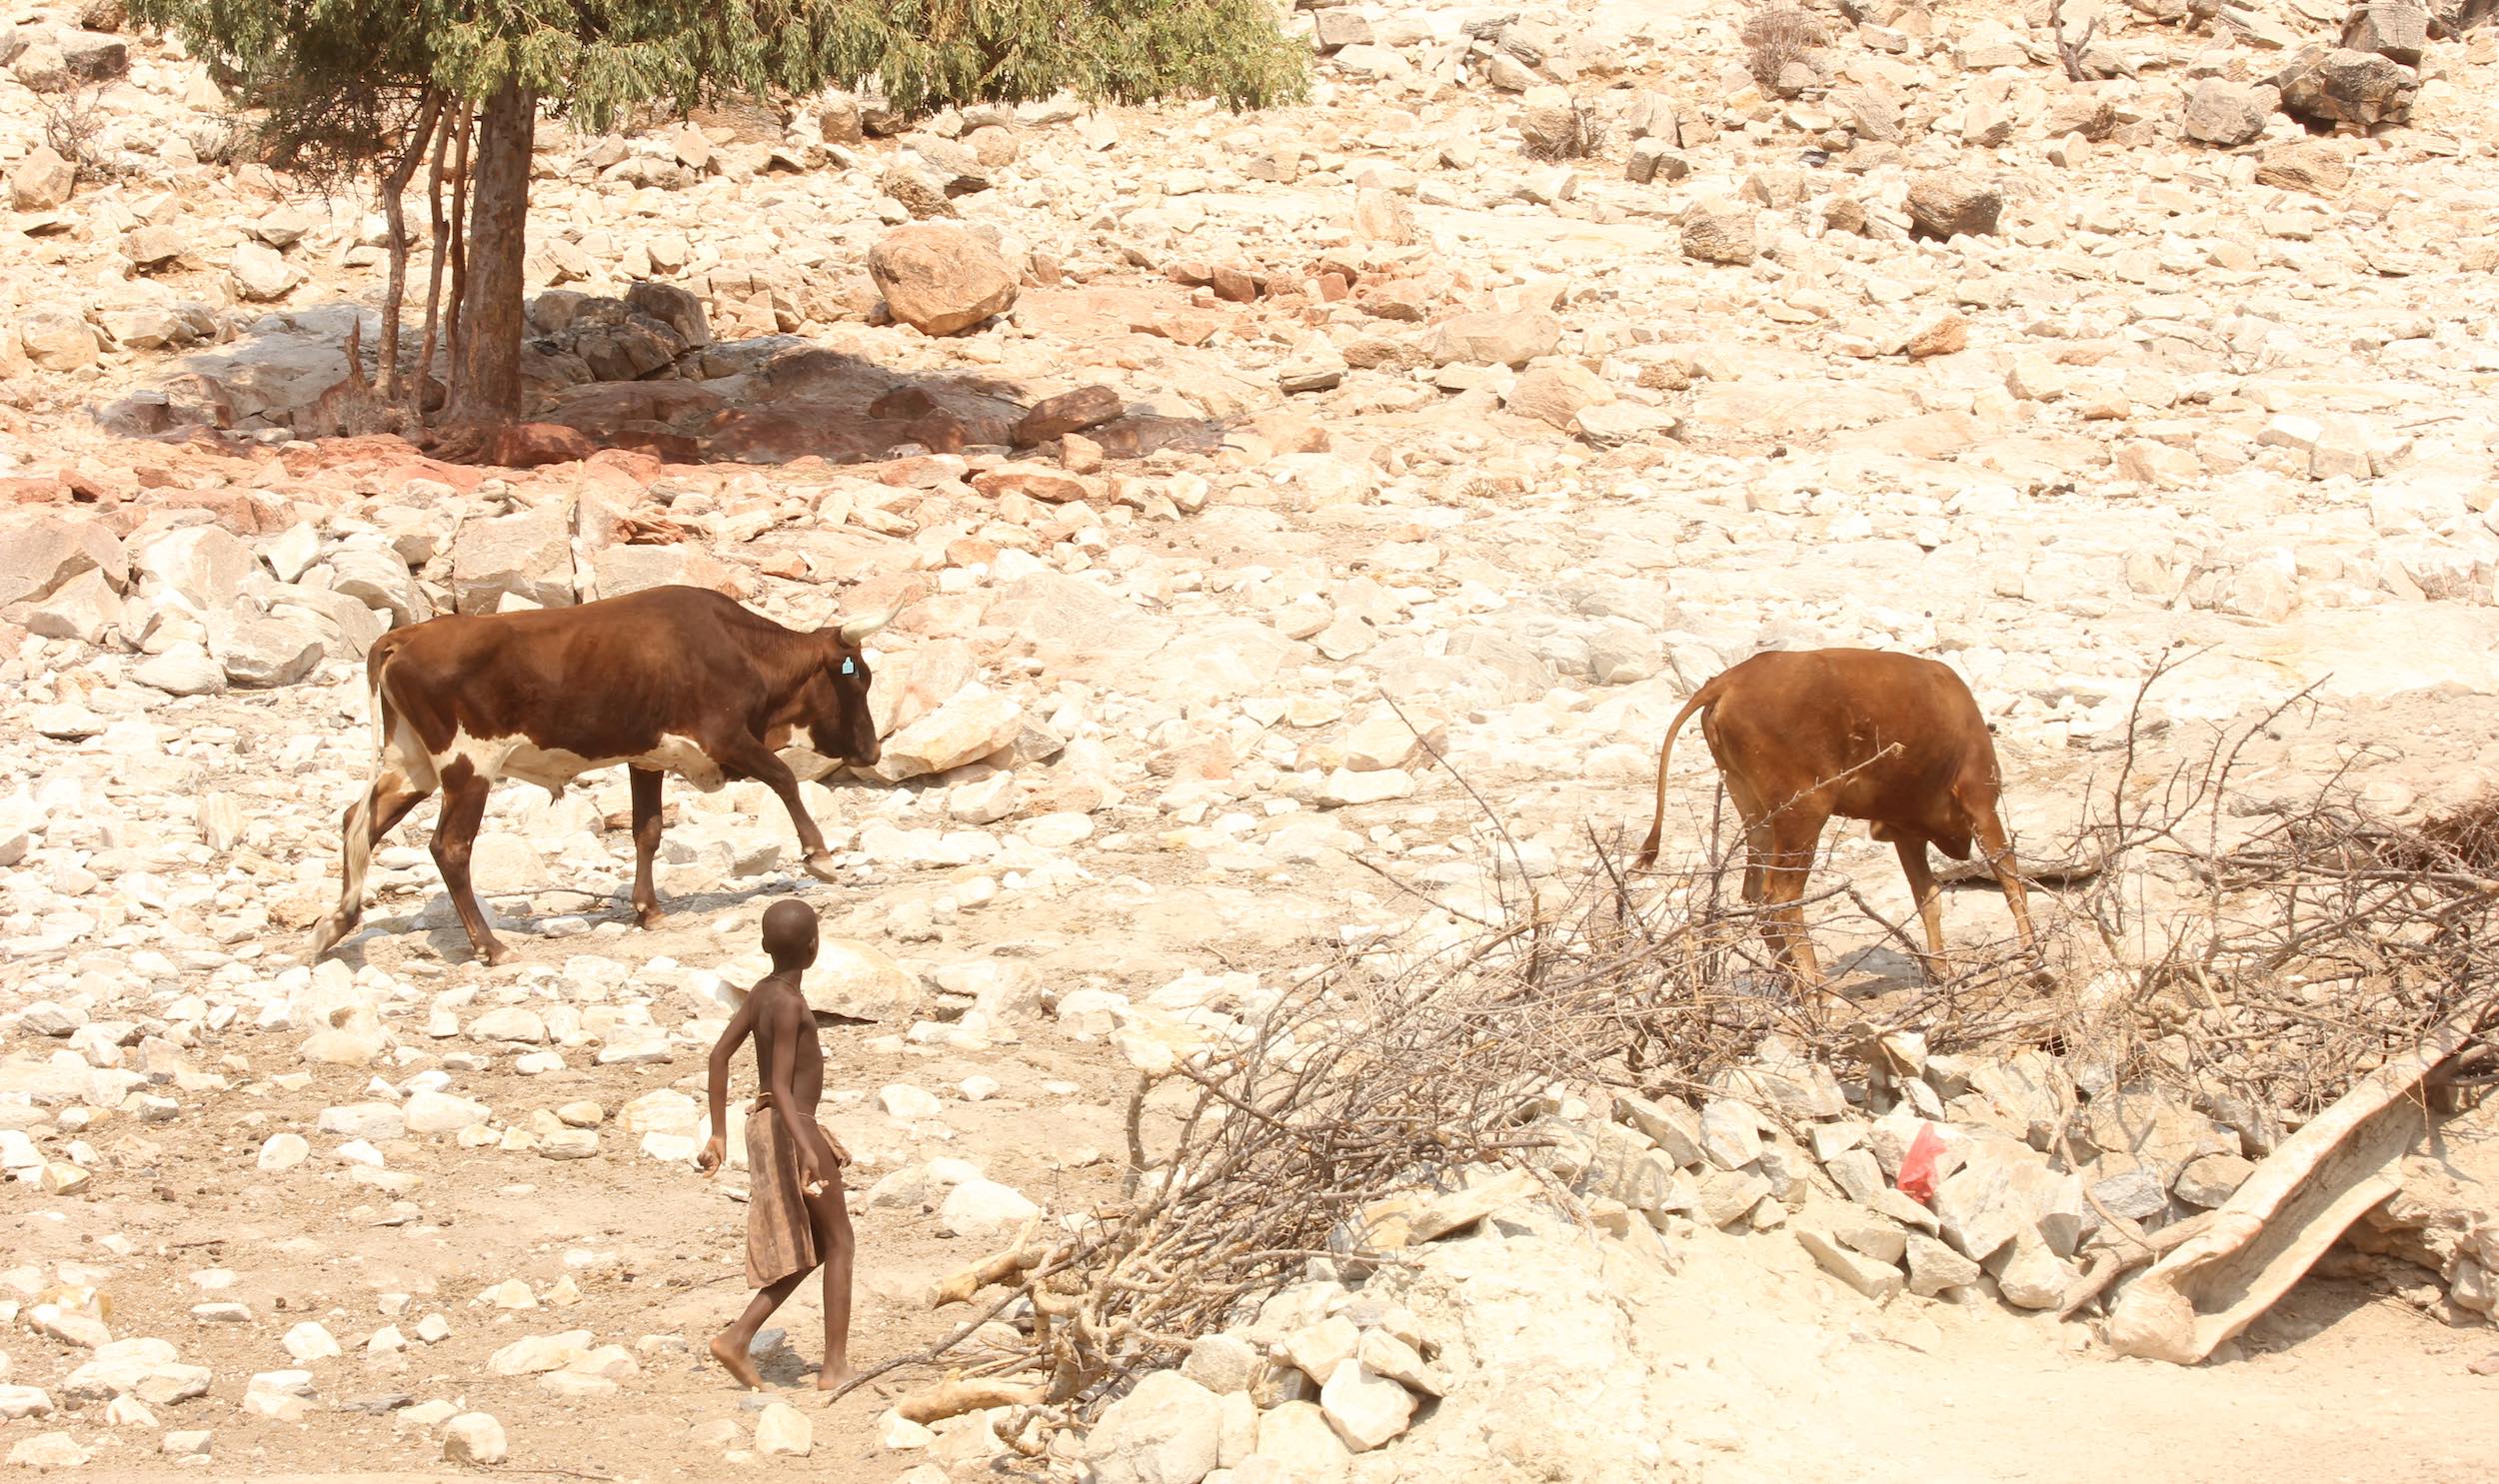 Two cows walk across a rocky landscape, guided by a young barefooted Himba boy.